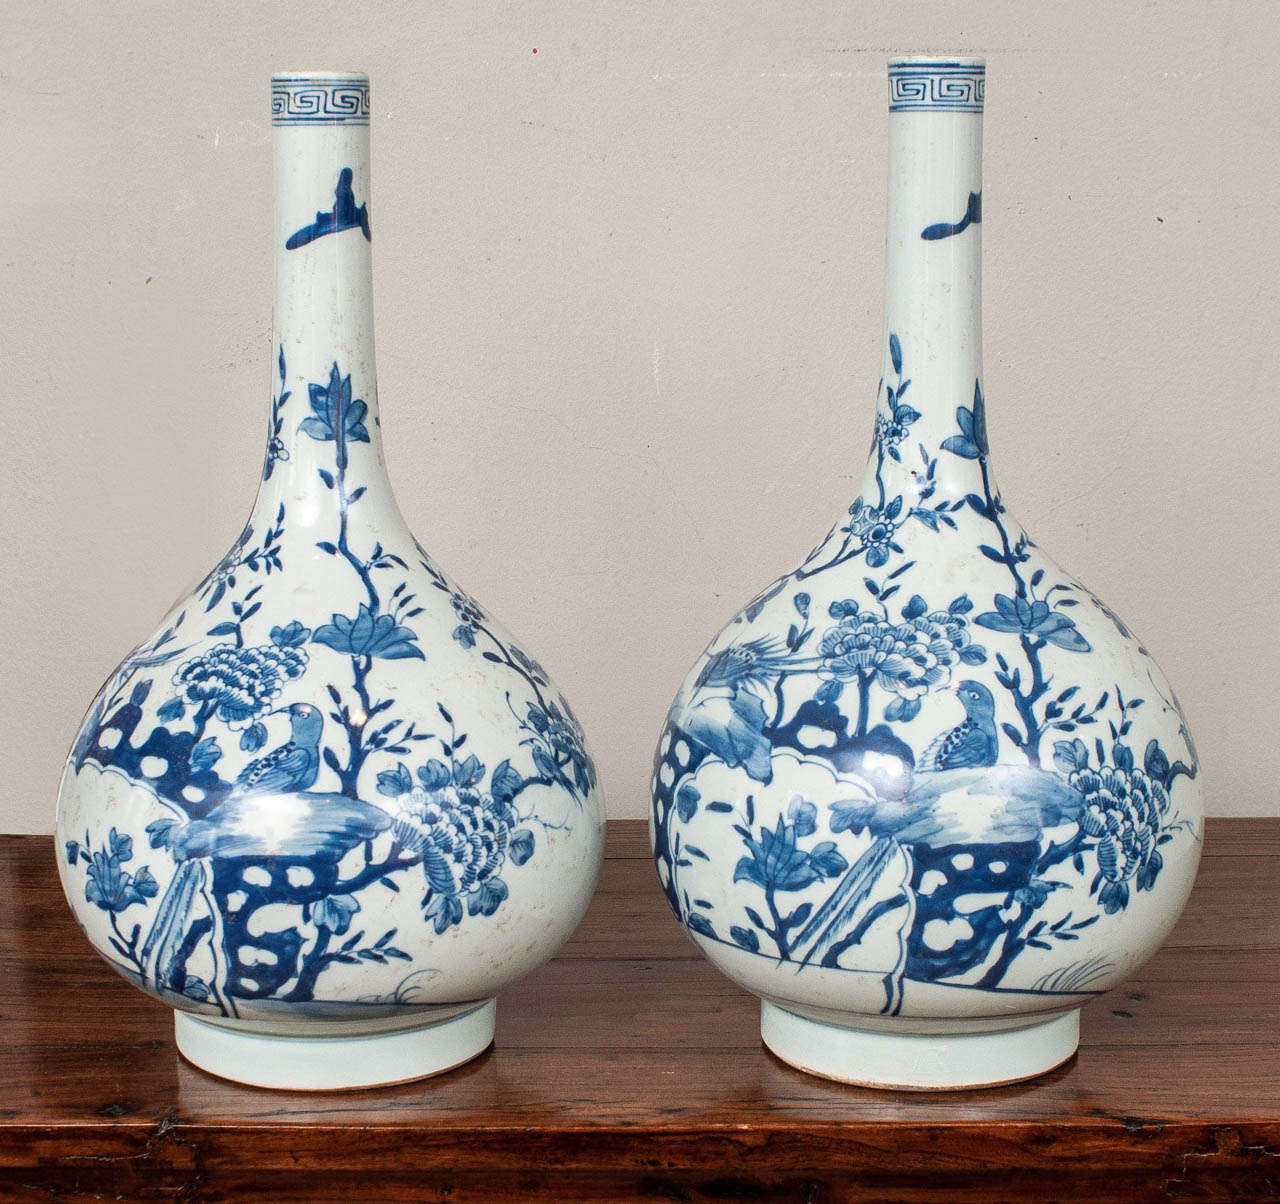 Chinese porcelain vases in 